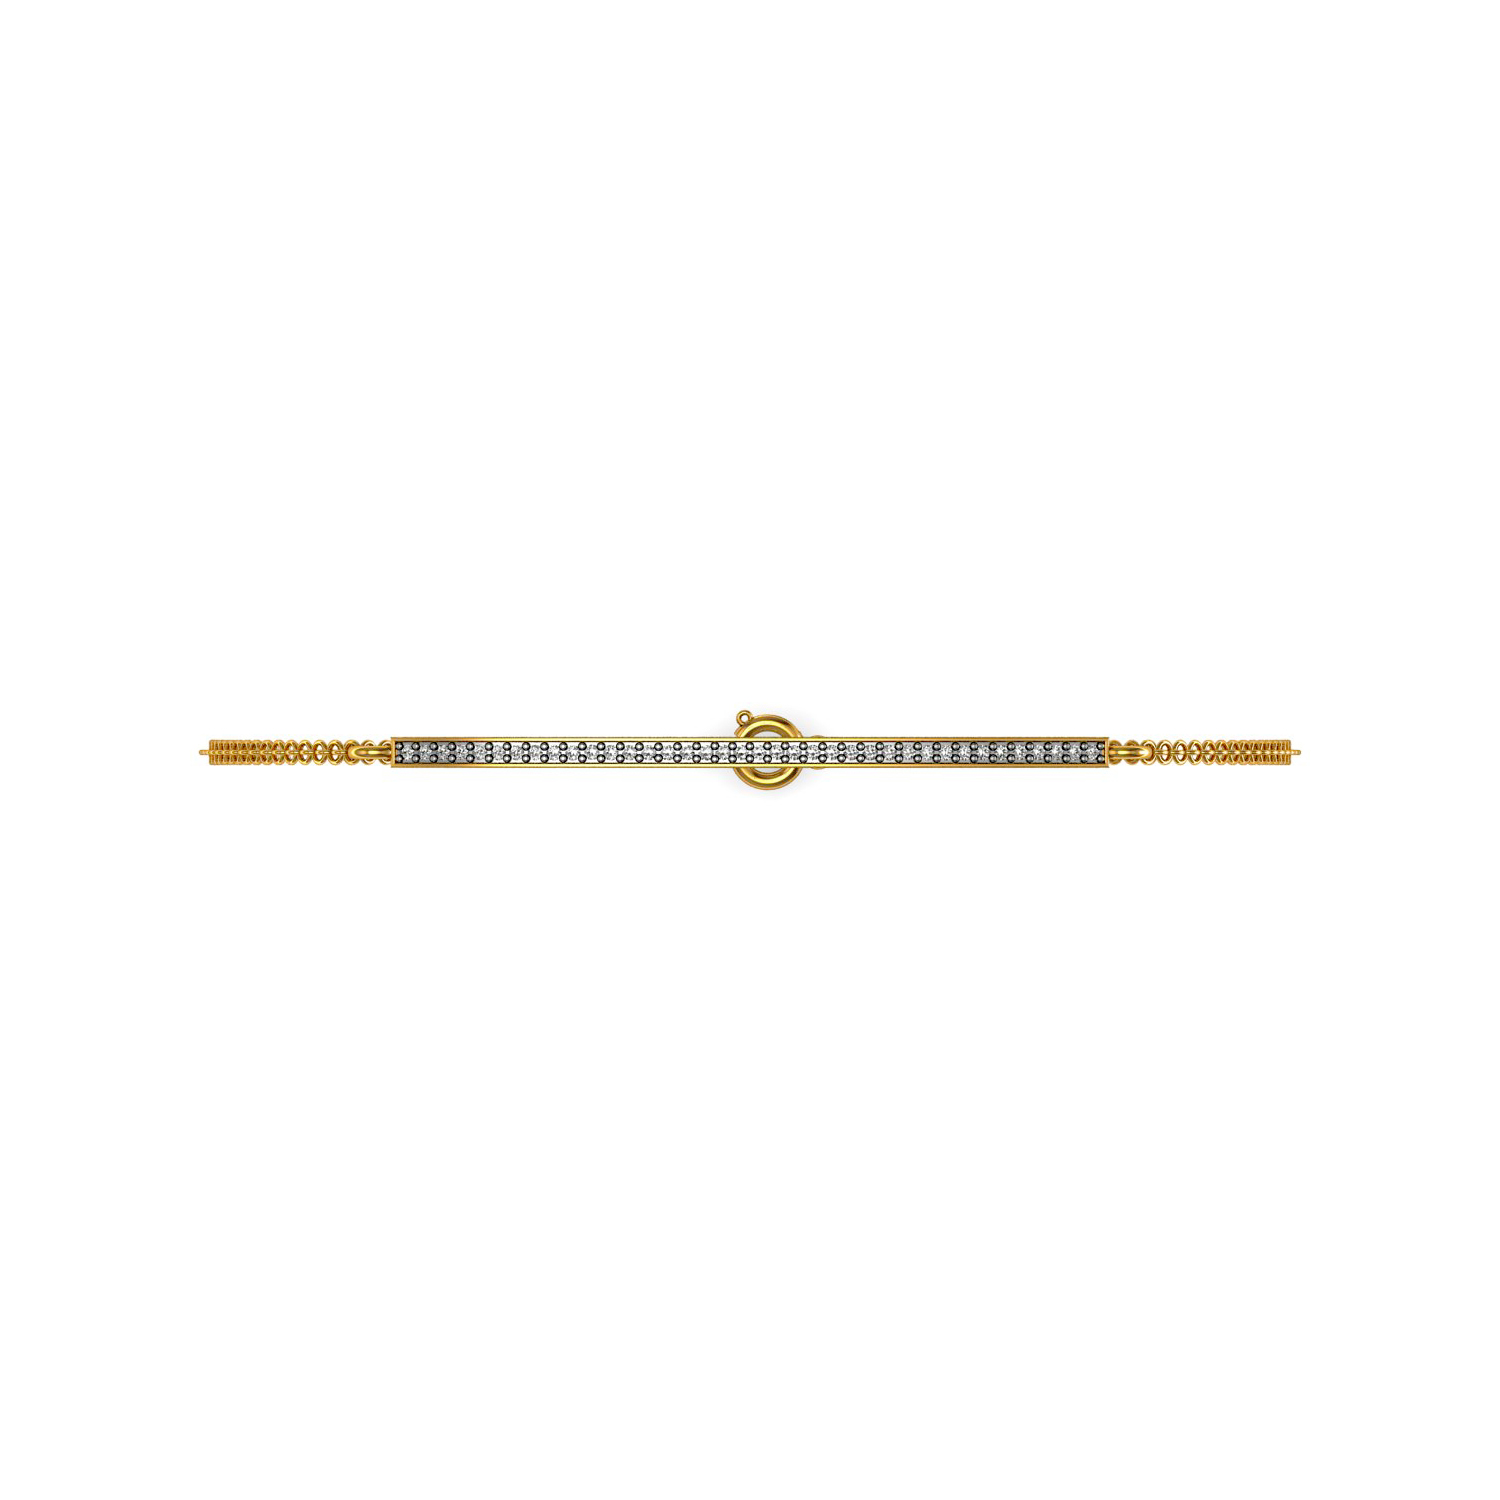 Solid gold bar chain bracelet in real diamond